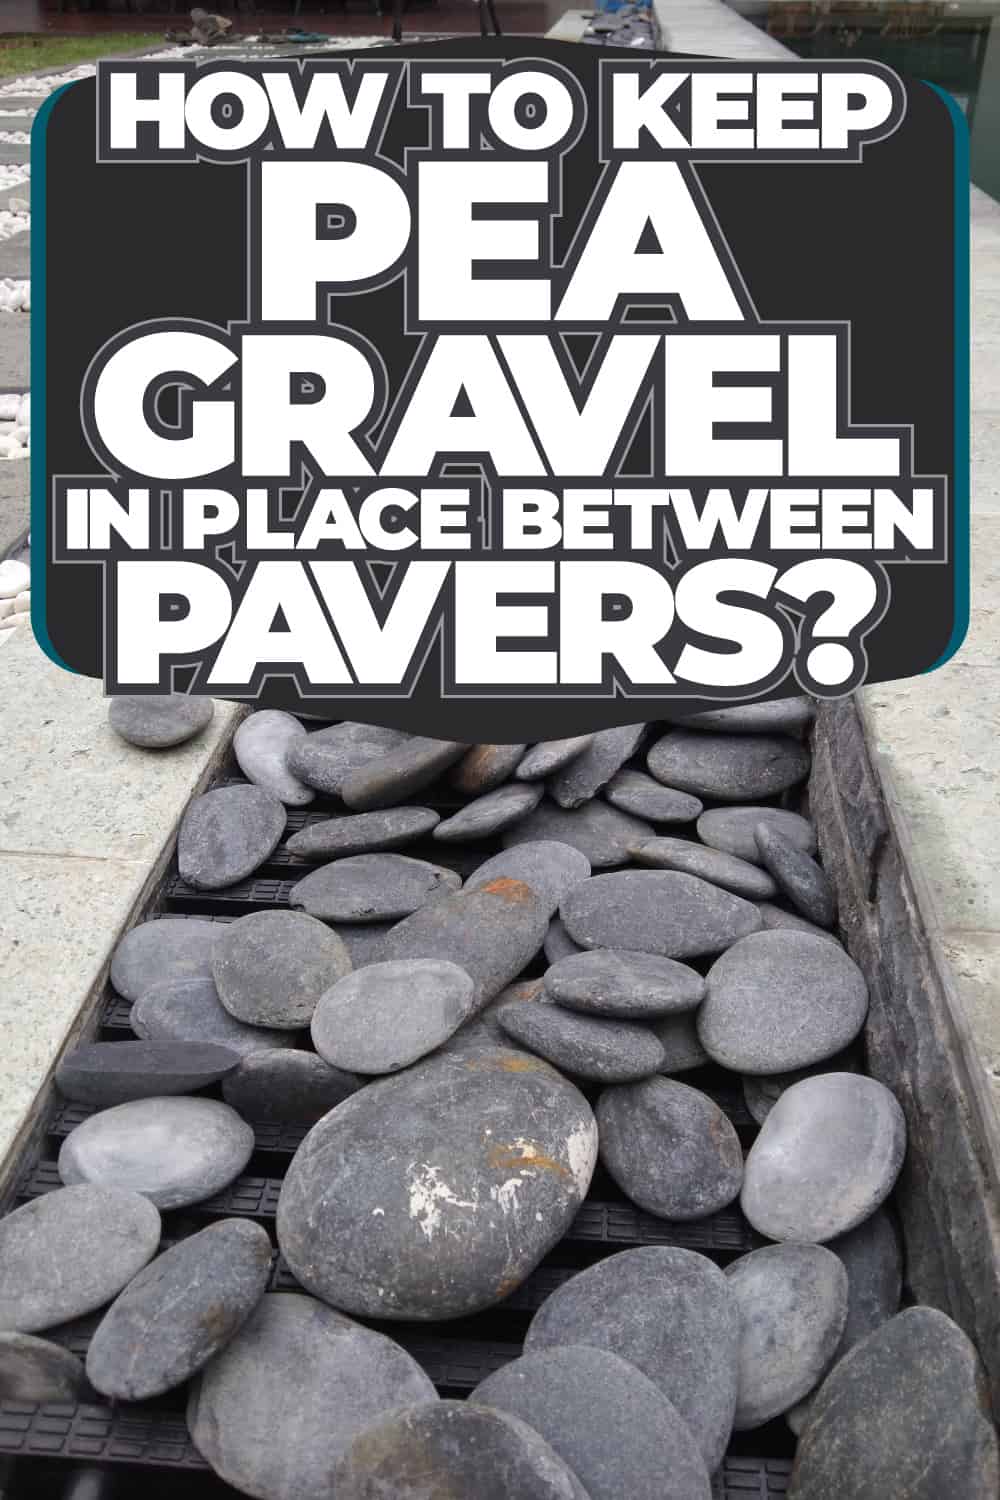 How To Keep Pea Gravel In Place Between Pavers [Expert Tips] - 1600X900